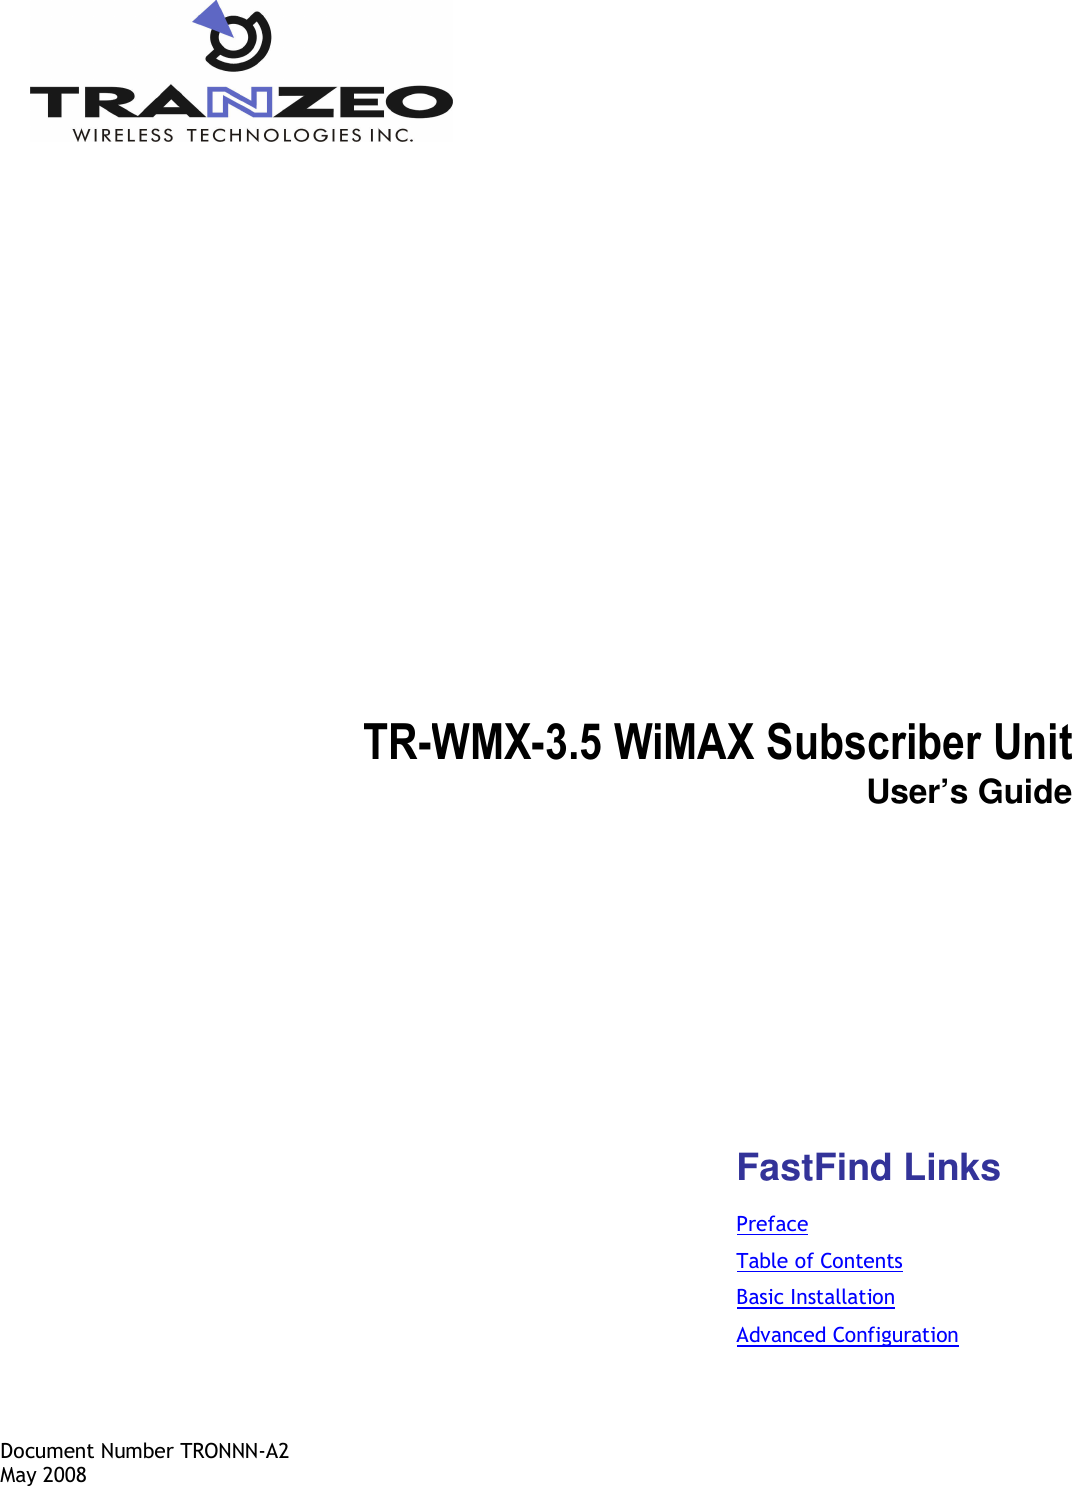  TR-WMX-3.5 WiMAX Subscriber Unit User’s Guide        Document Number TRONNN-A2 May 2008 FastFind Links Preface Table of Contents Basic Installation Advanced Configuration 